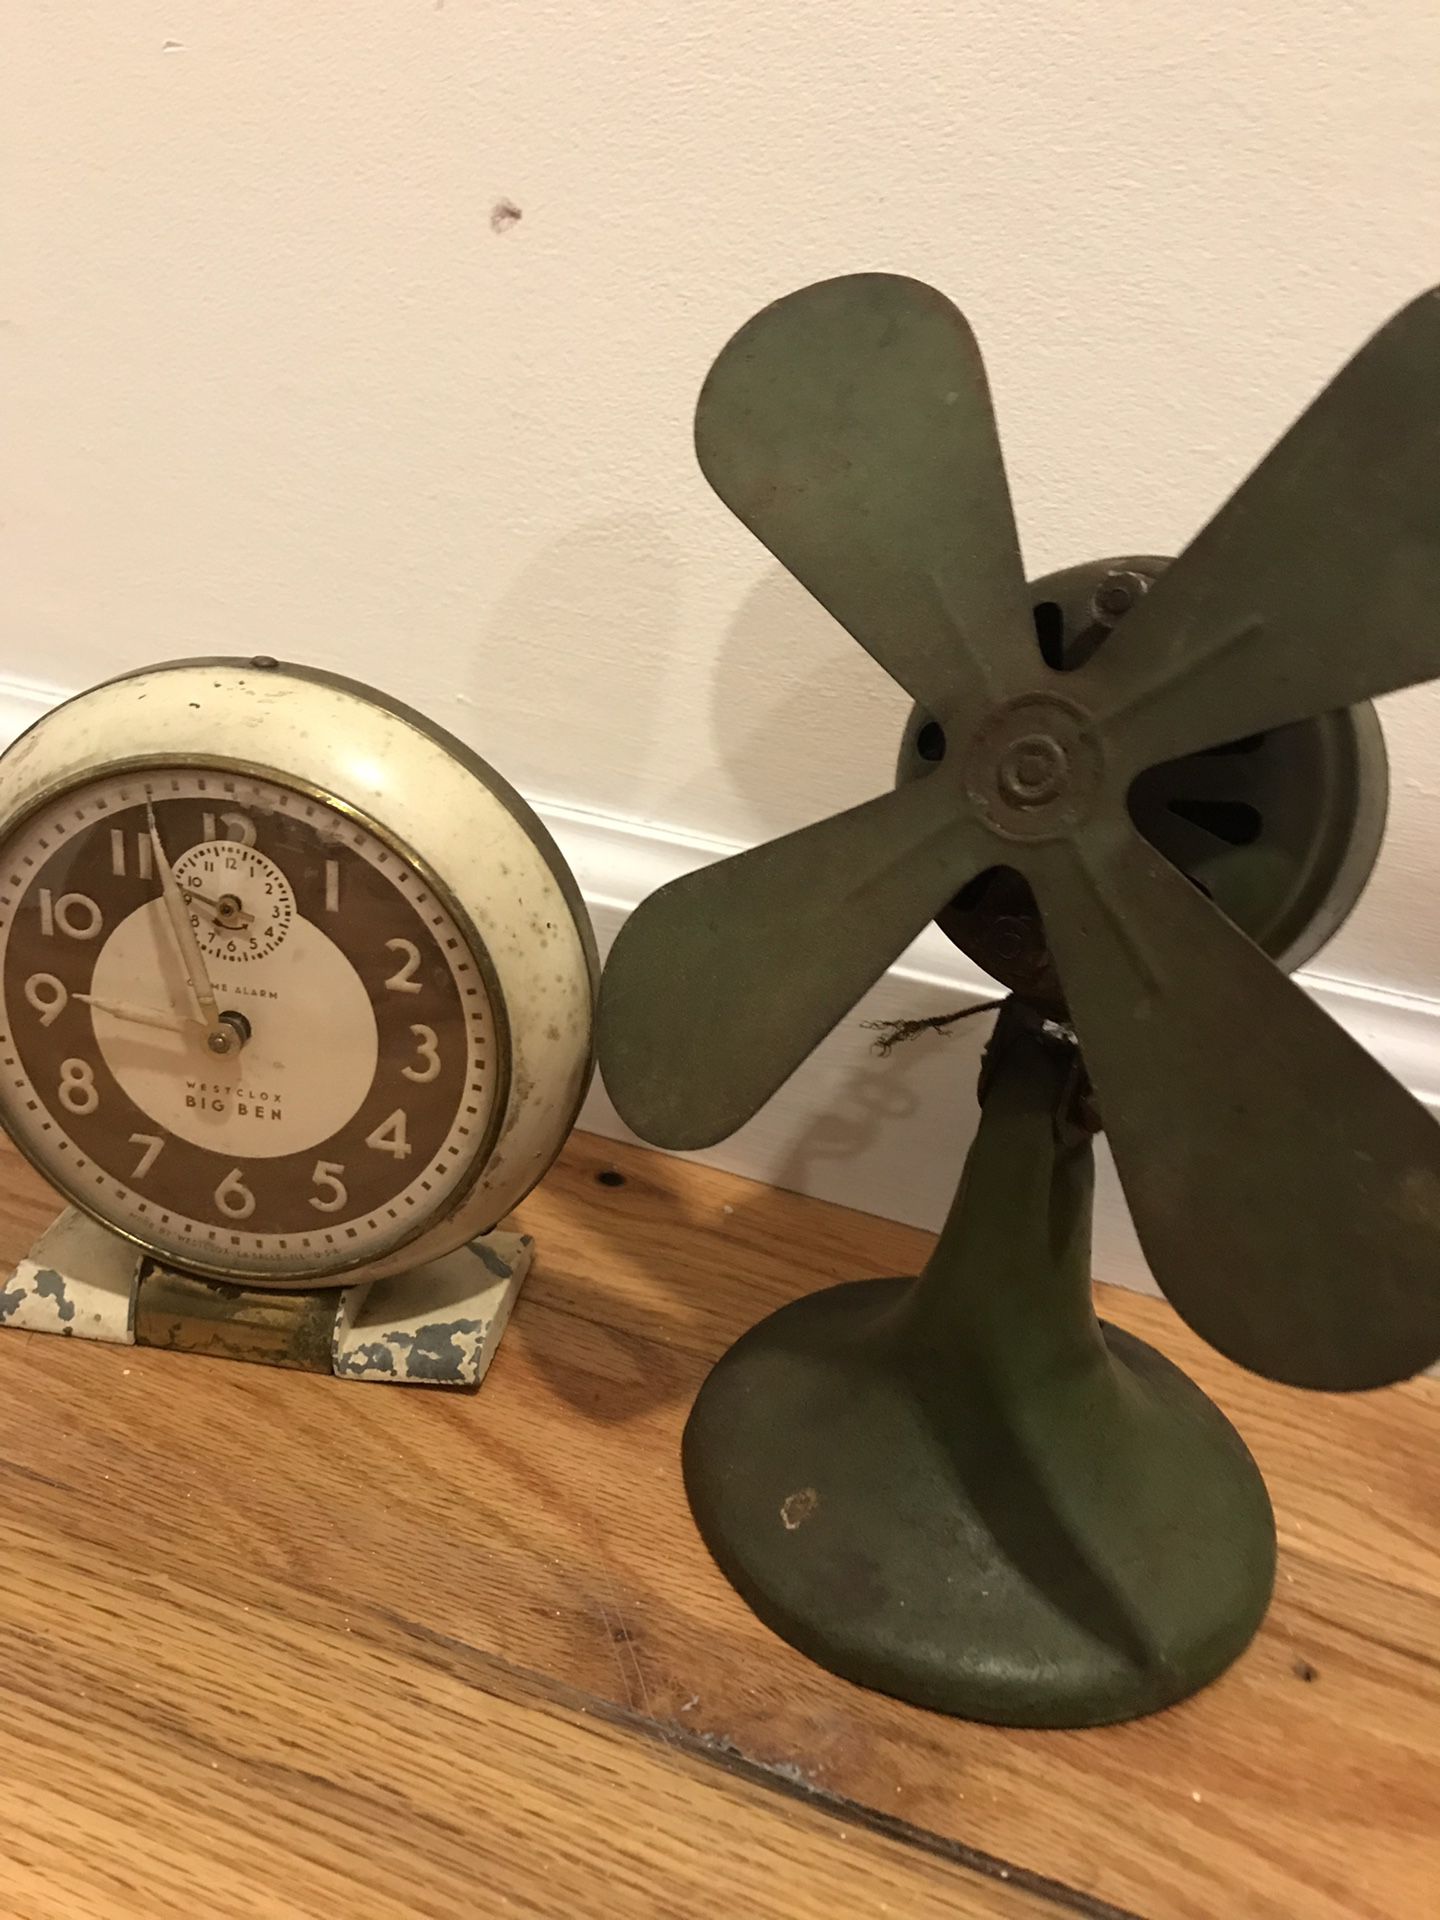 Antique metal fan and clock